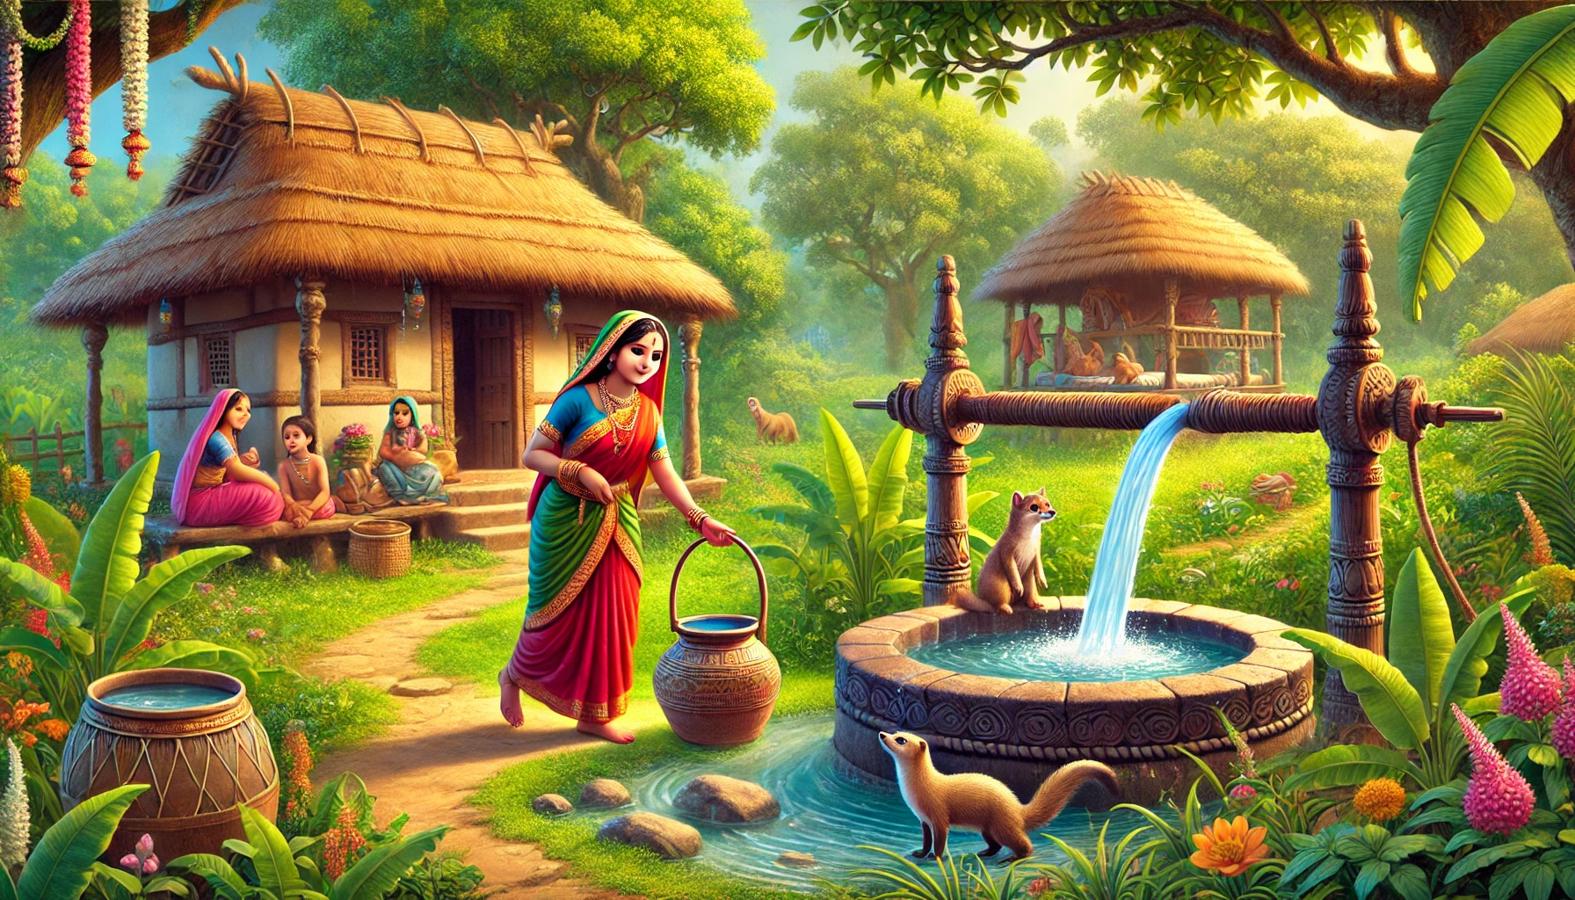 Lakshmi fetching water from the well while the mongoose watches over the baby.